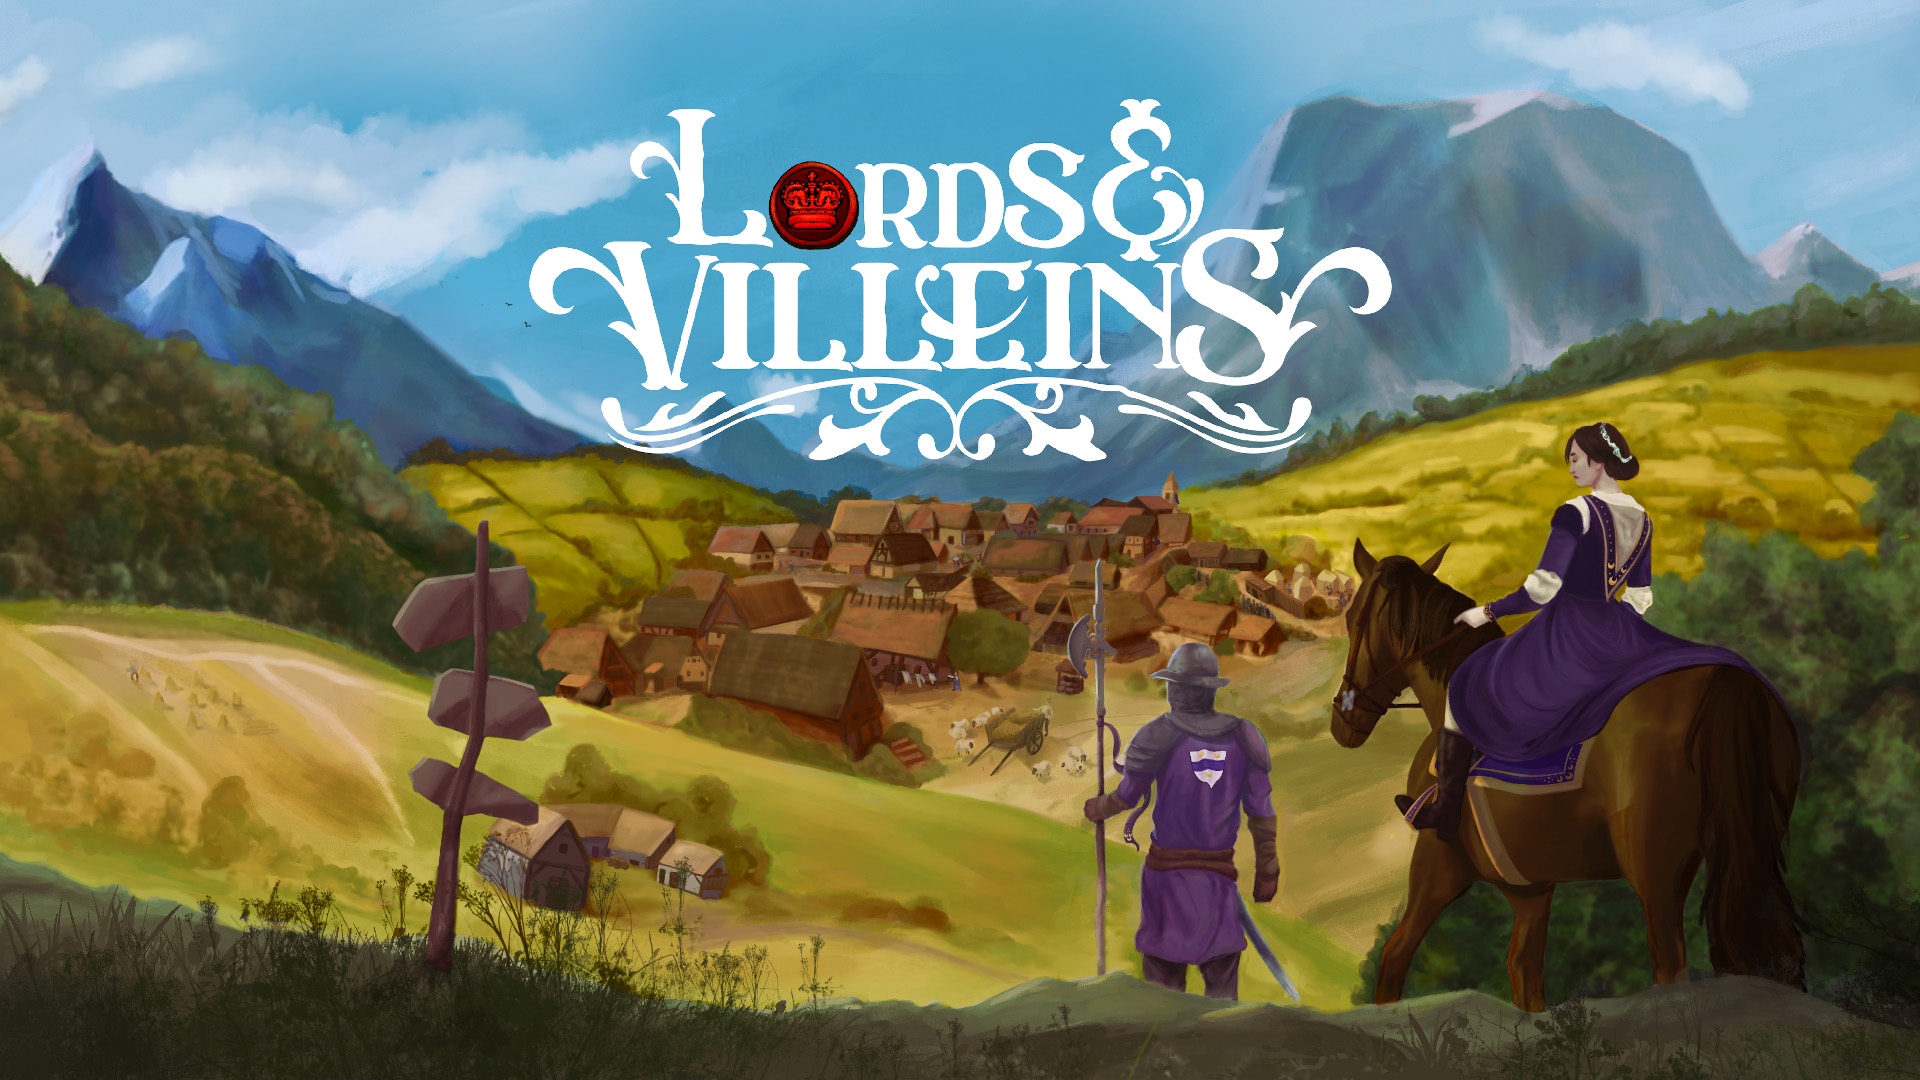 Game image - LORDS AND VILLEINS